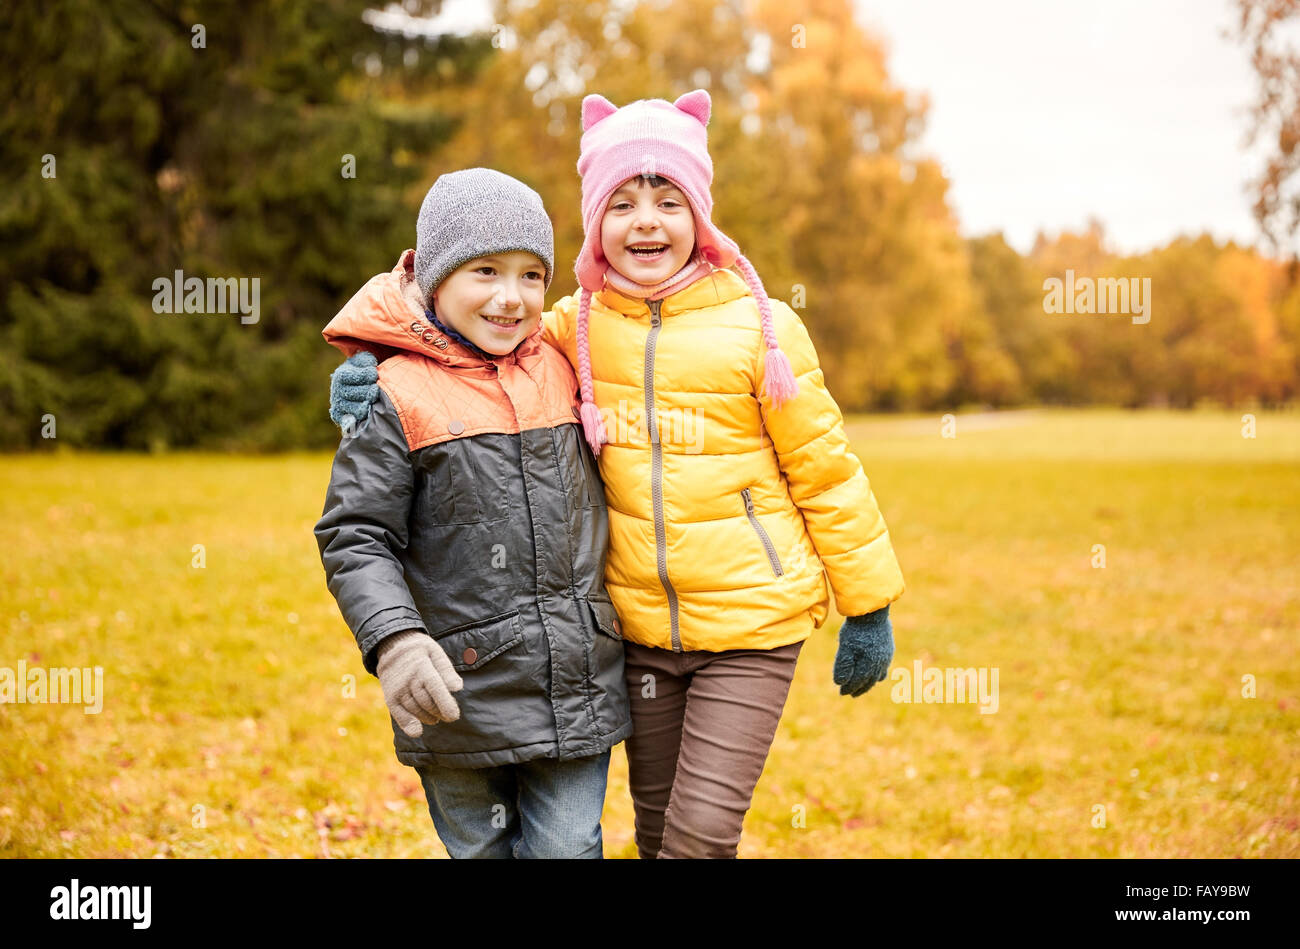 happy little girl and boy in autumn park Stock Photo